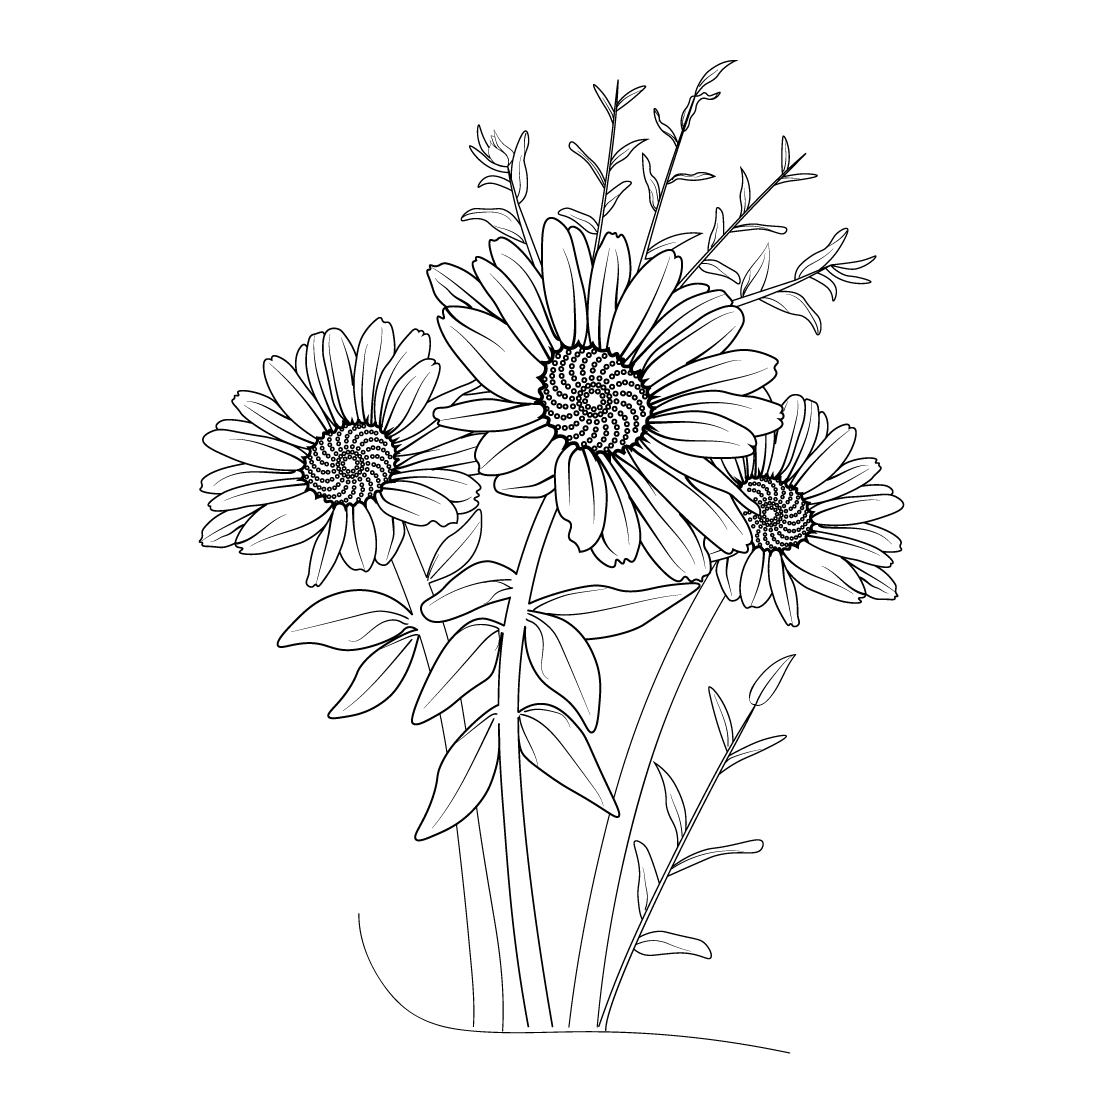 Pencil drawing a flower with leaves isolated Vector Image